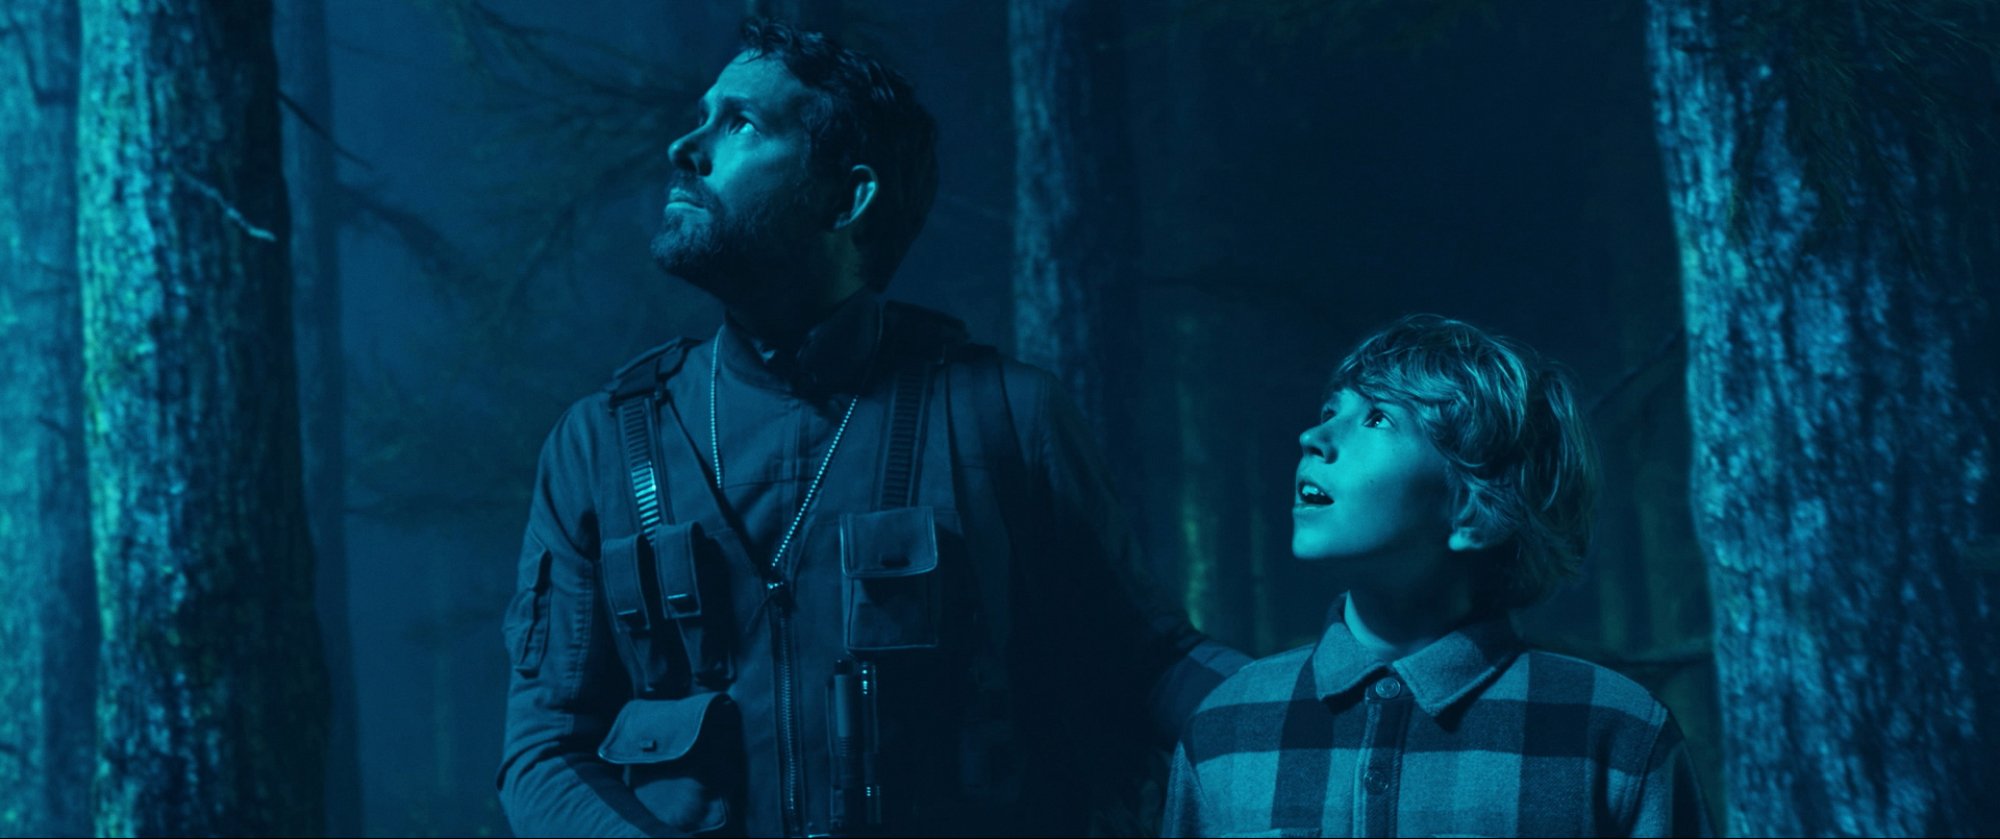 'The Adam Project' Ryan Reynolds as Big Adam and Walker Scobell as Young Adam looking up at blue light in the forest